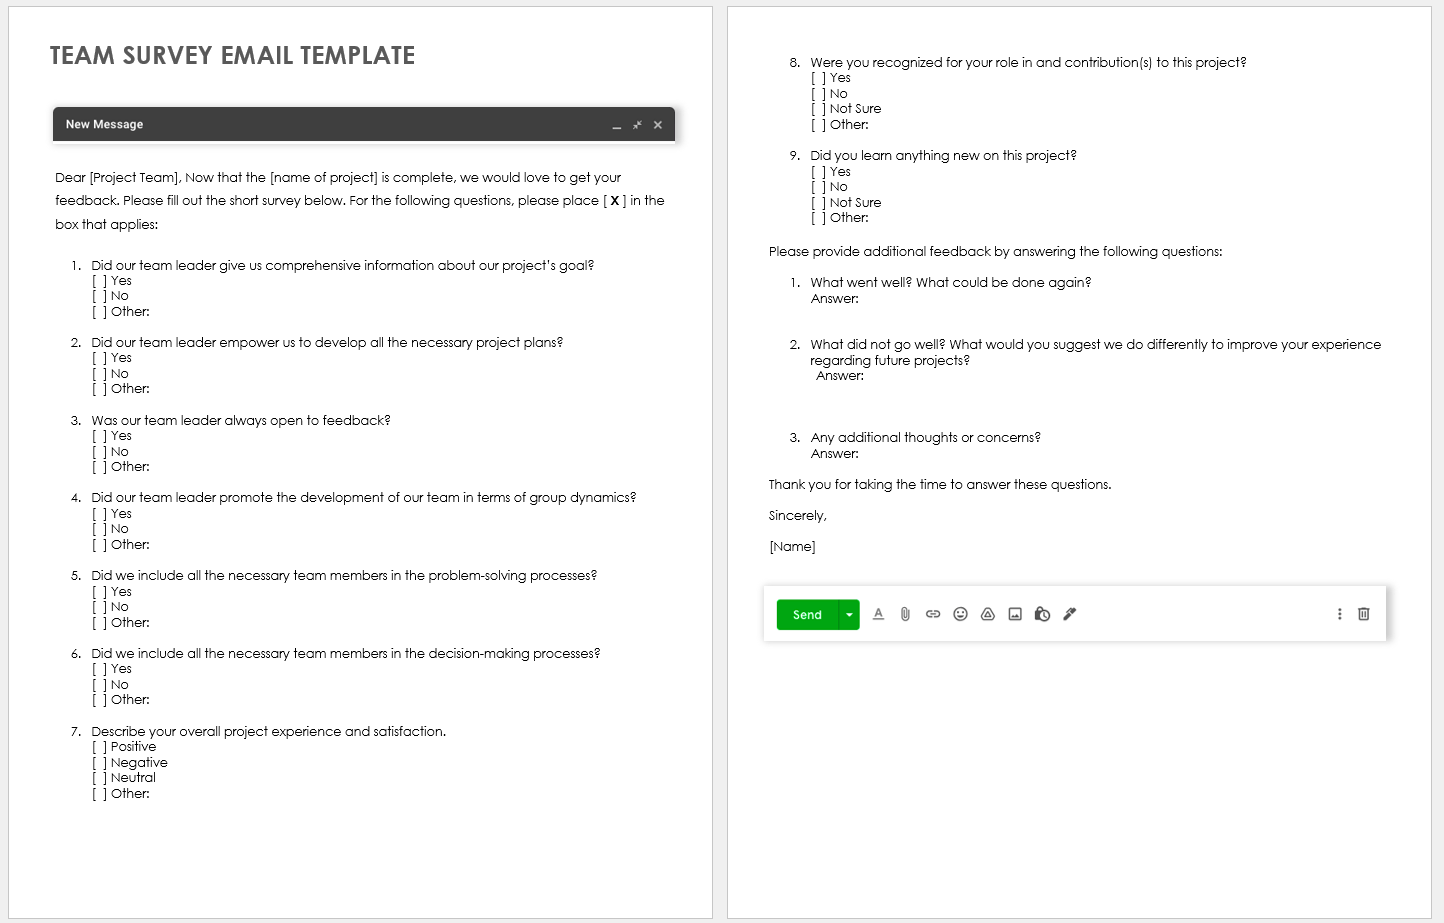 Team Survey Email Template